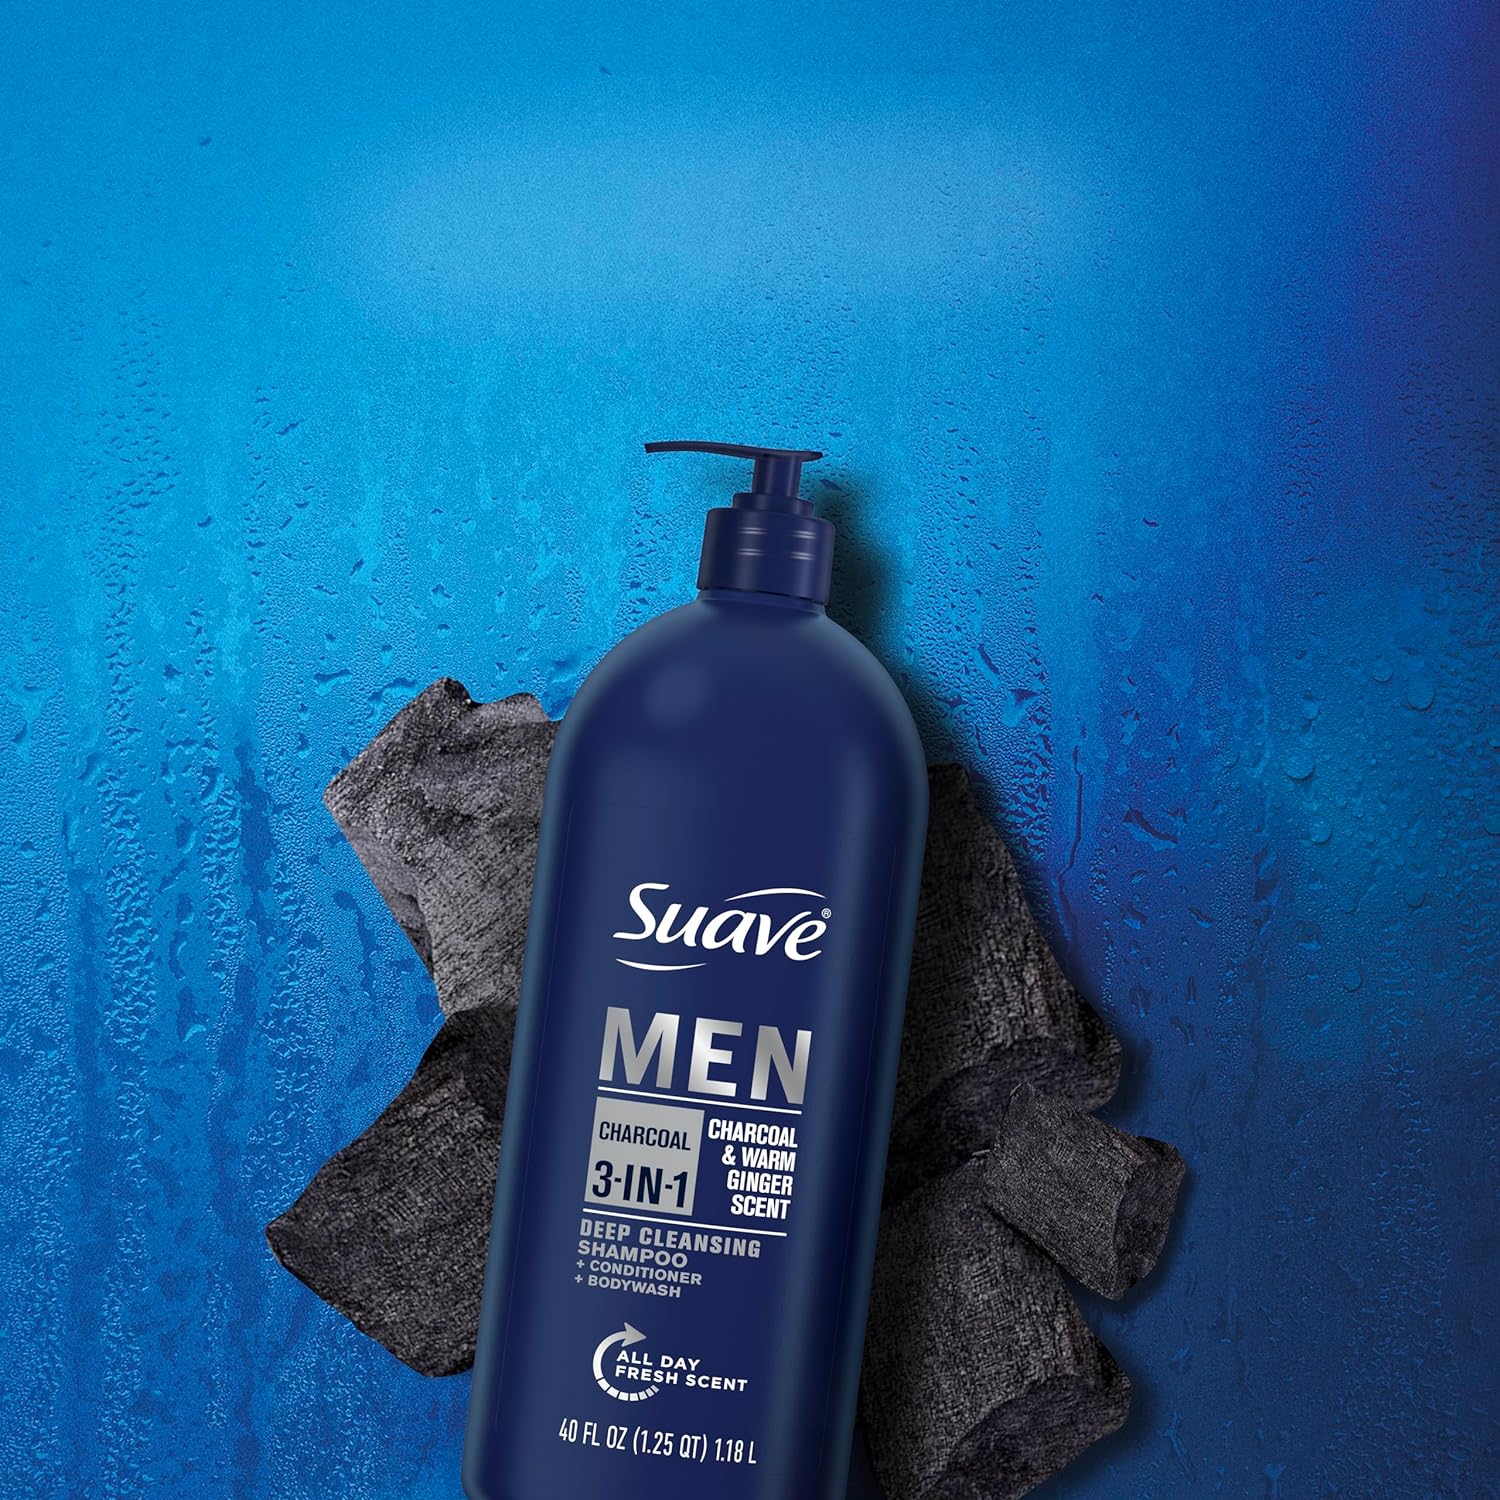 Suave Men Shampoo Conditioner Bodywash 3 in 1 Charcoal &Warm Ginger to Cleanse and Nourish Hair and Skin, 40 oz Pack of 3 : Beauty & Personal Care